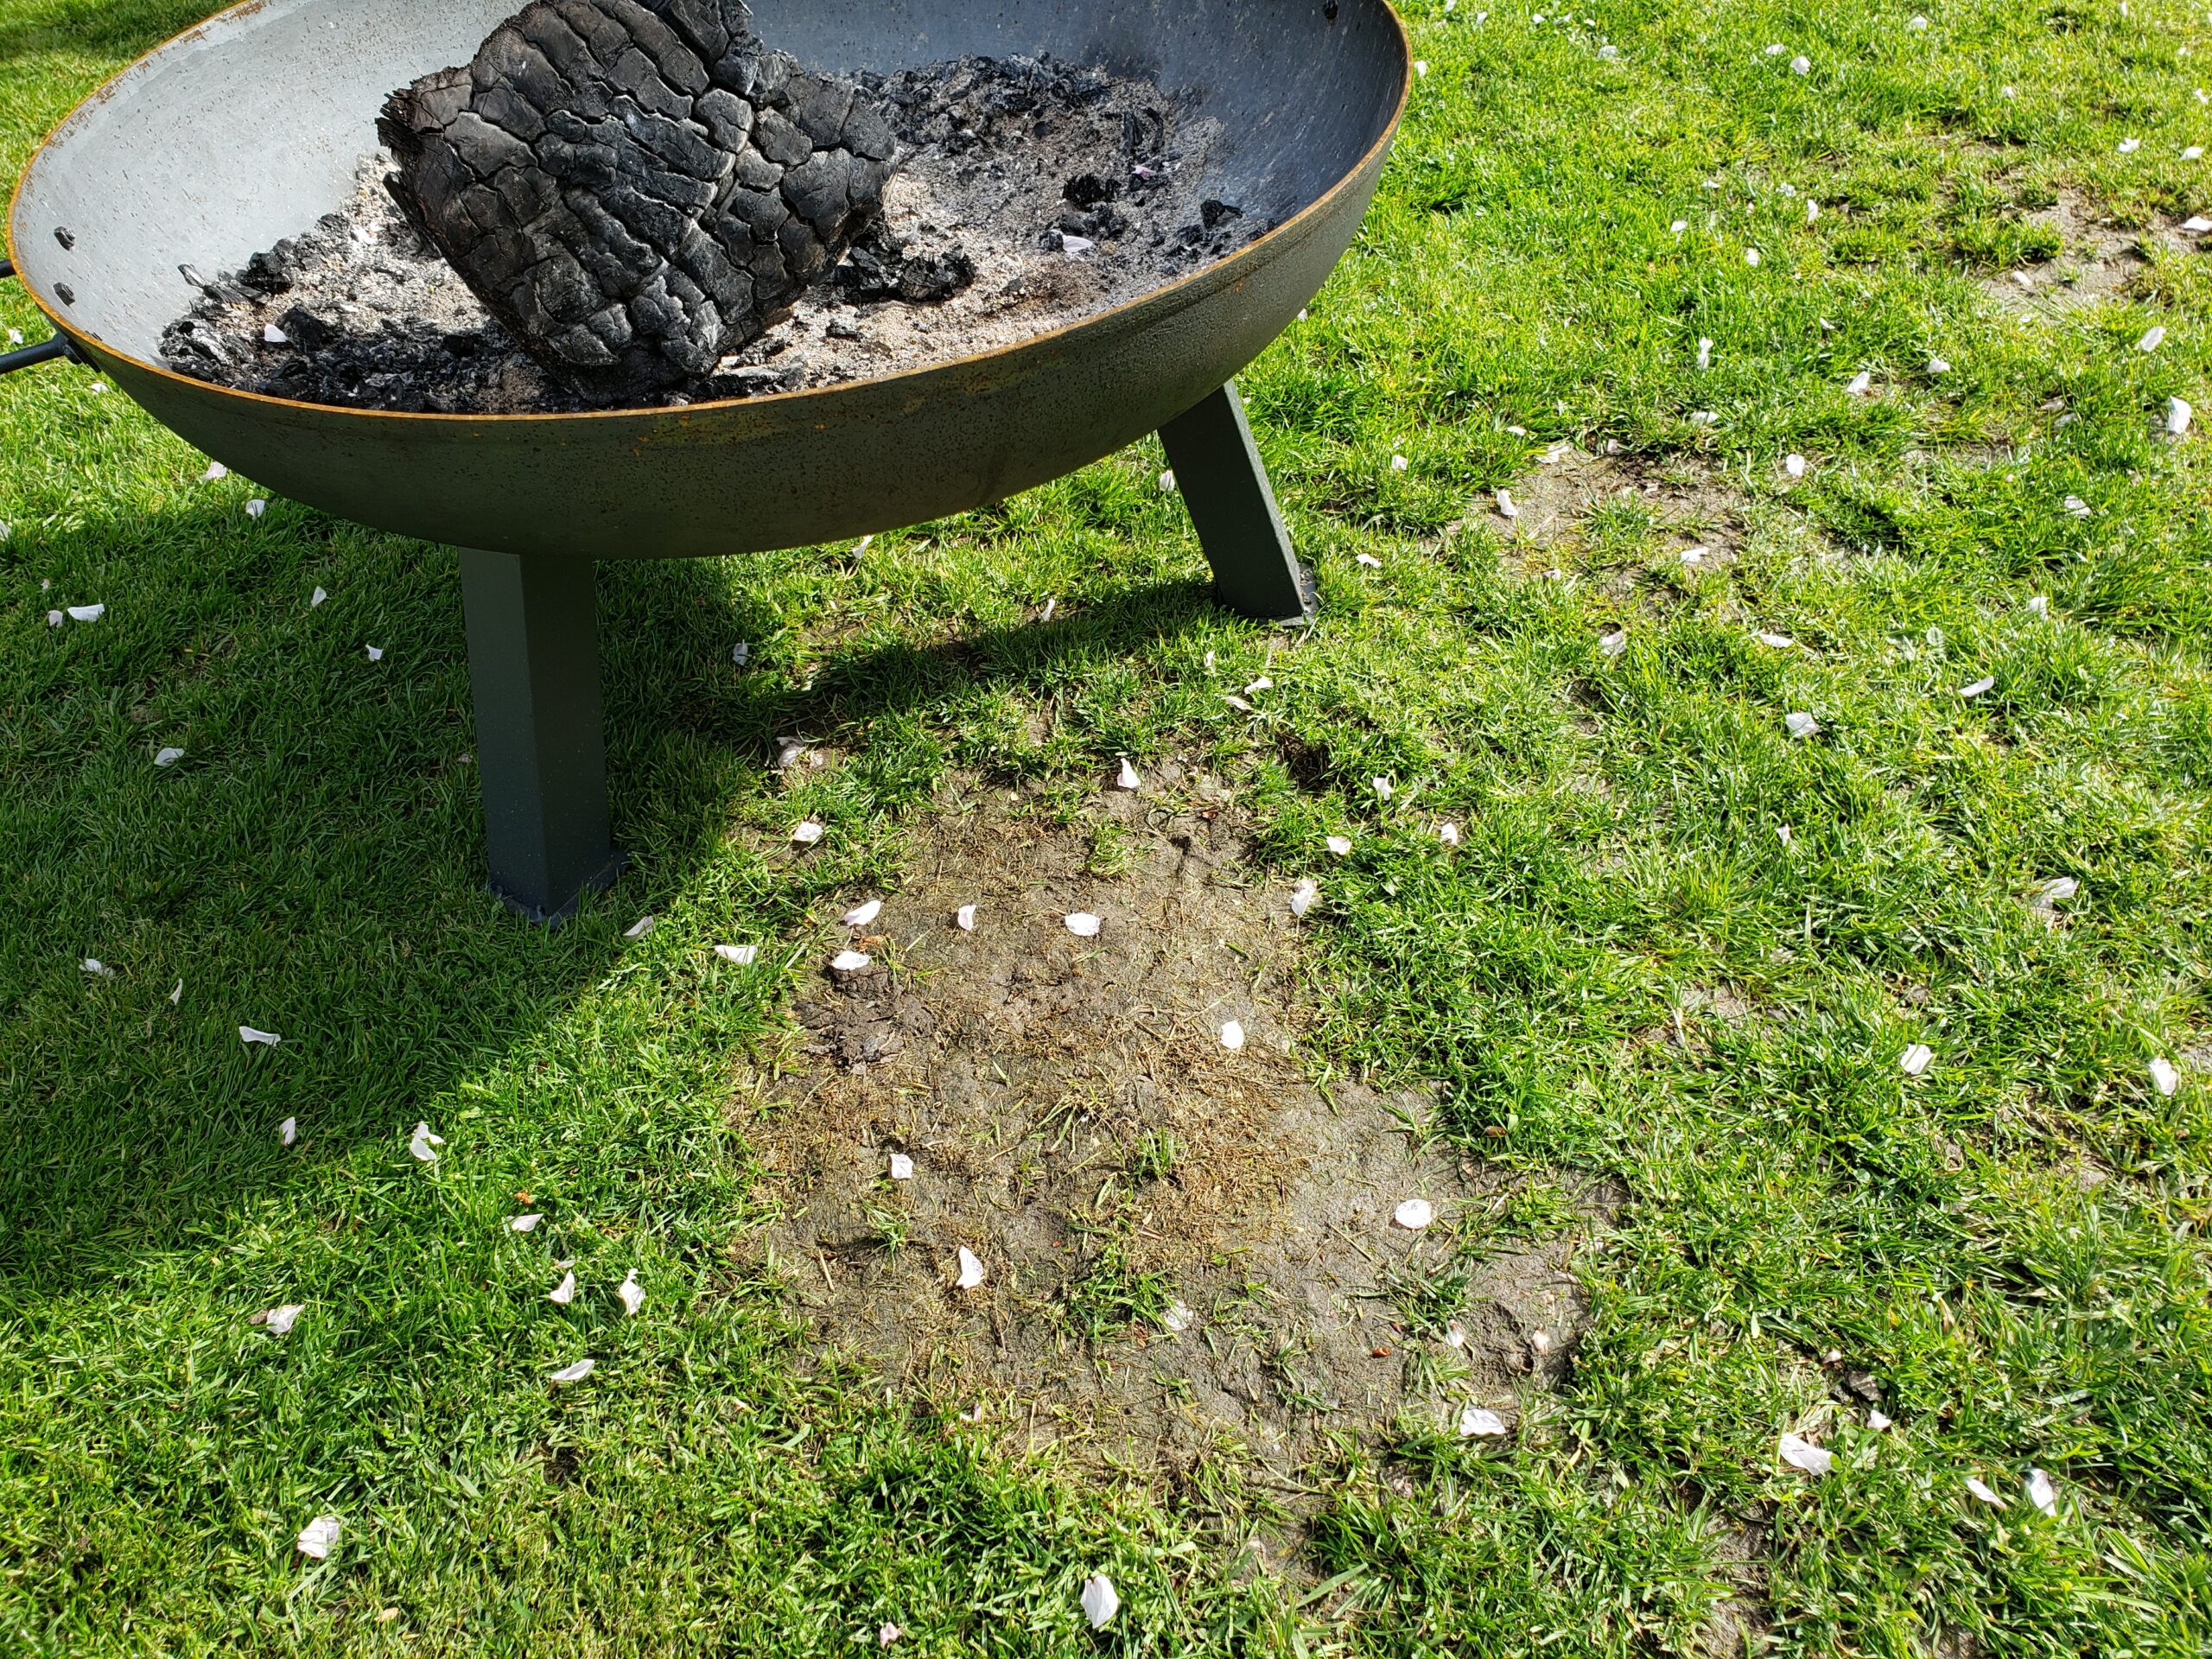 Fire Pit On Grass 5 Best Ways To Prevent Damage To Your Lawn